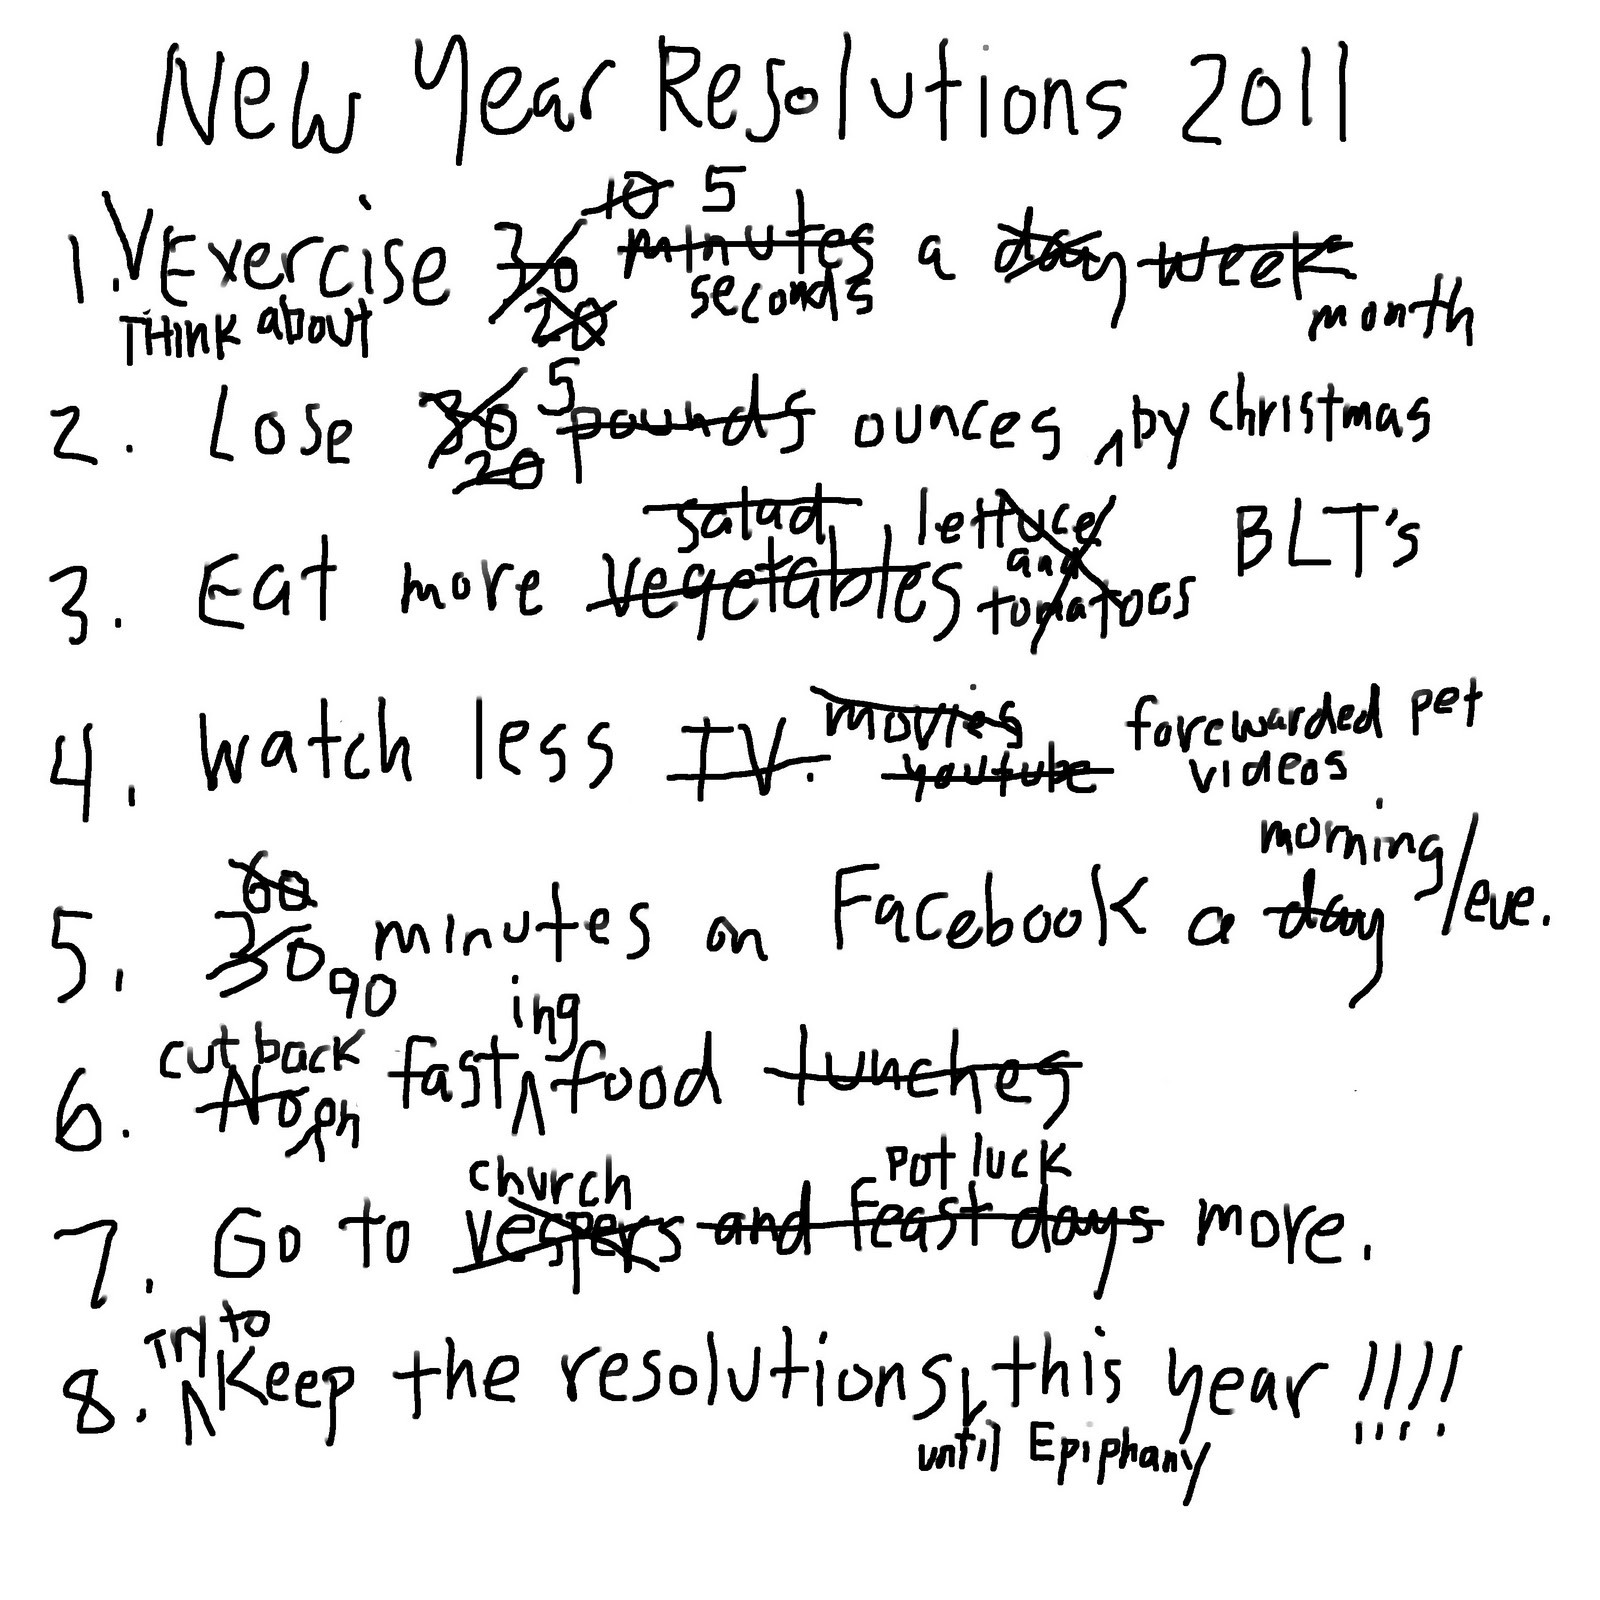 New Year Resolution Quotes Funny
 Humorous New Years Resolutions Quotes QuotesGram